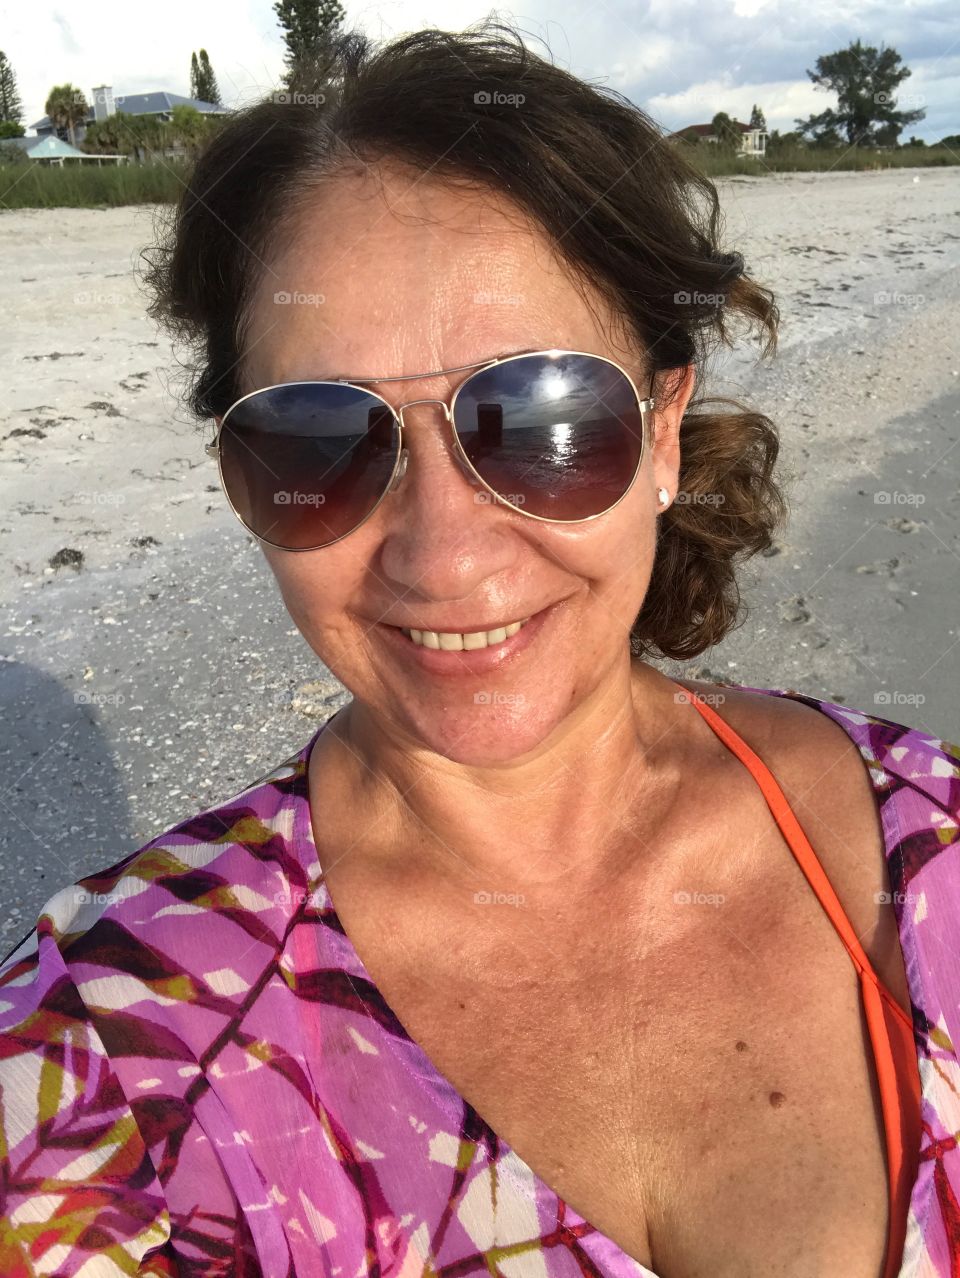 Lady’s  smiling Wait sunglasses at the beach